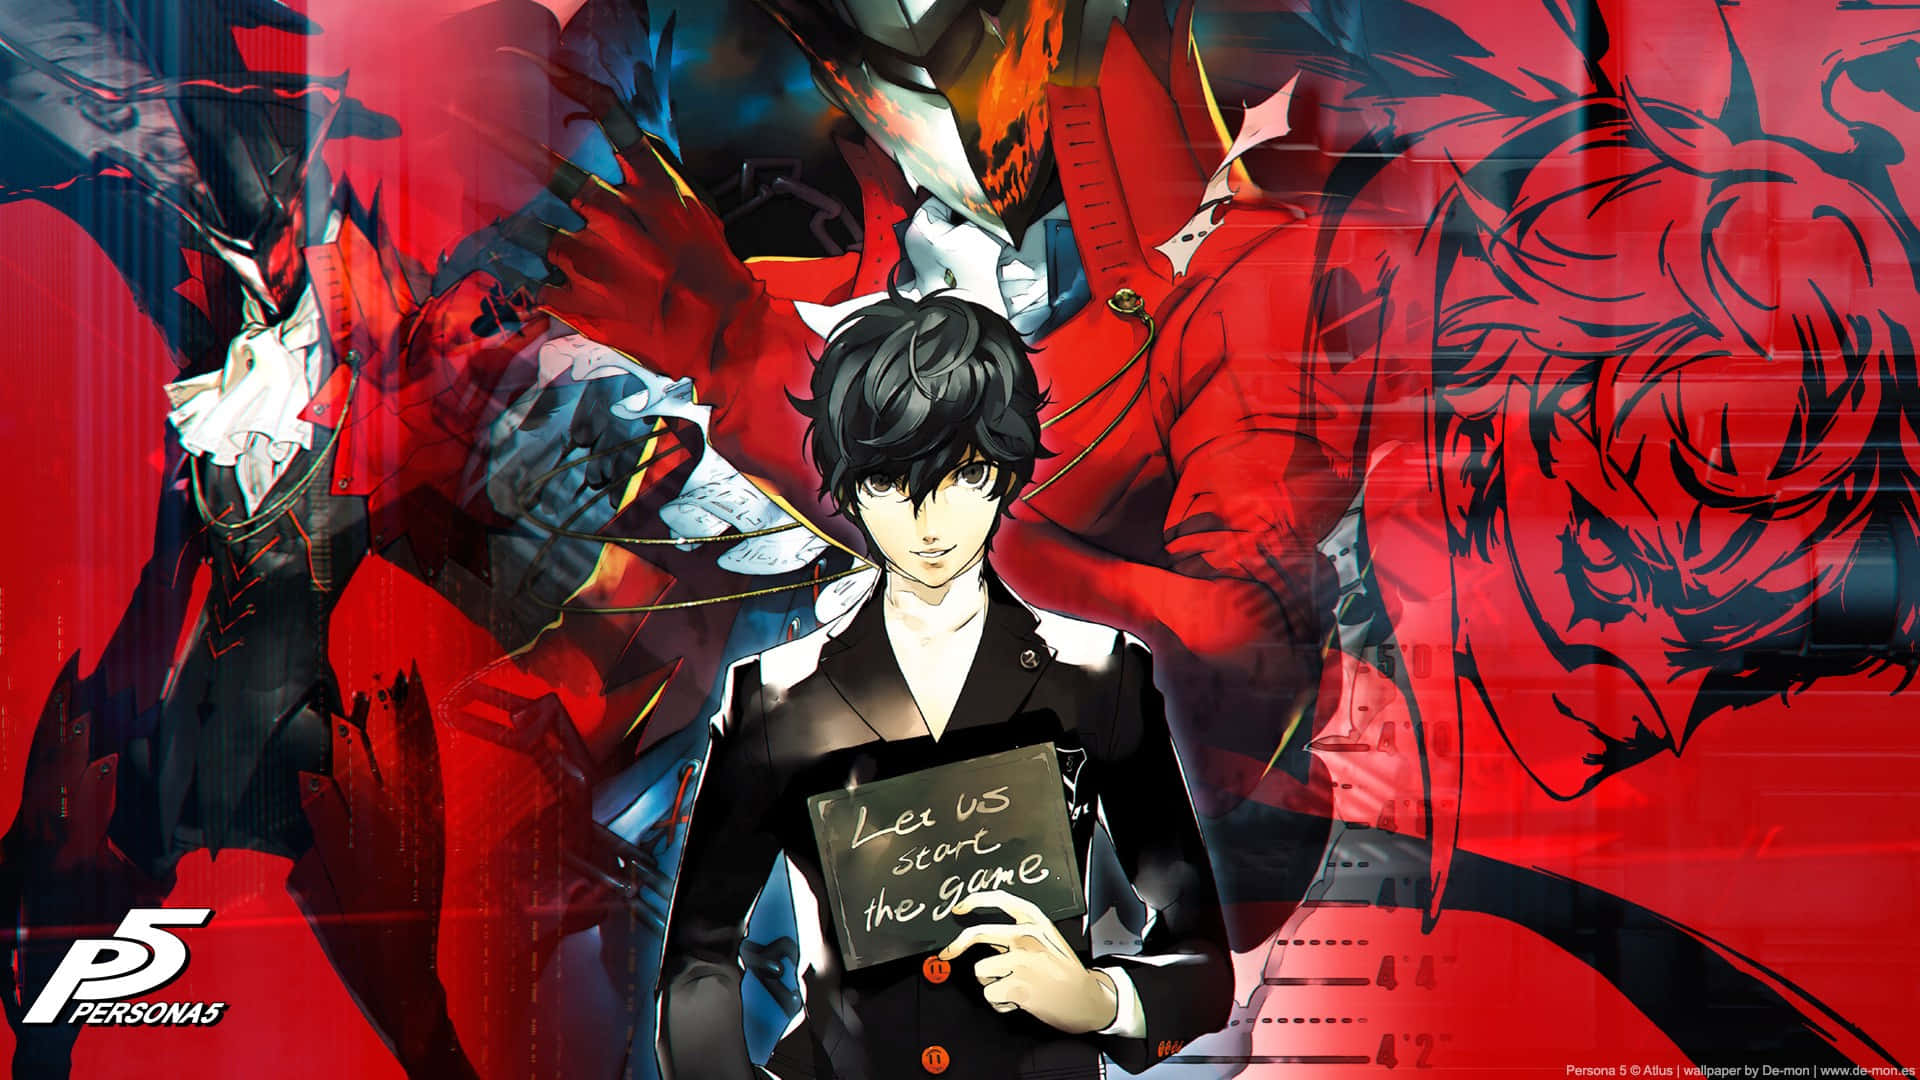 The emblem of the Phantom Thieves from the game Persona 5. Wallpaper